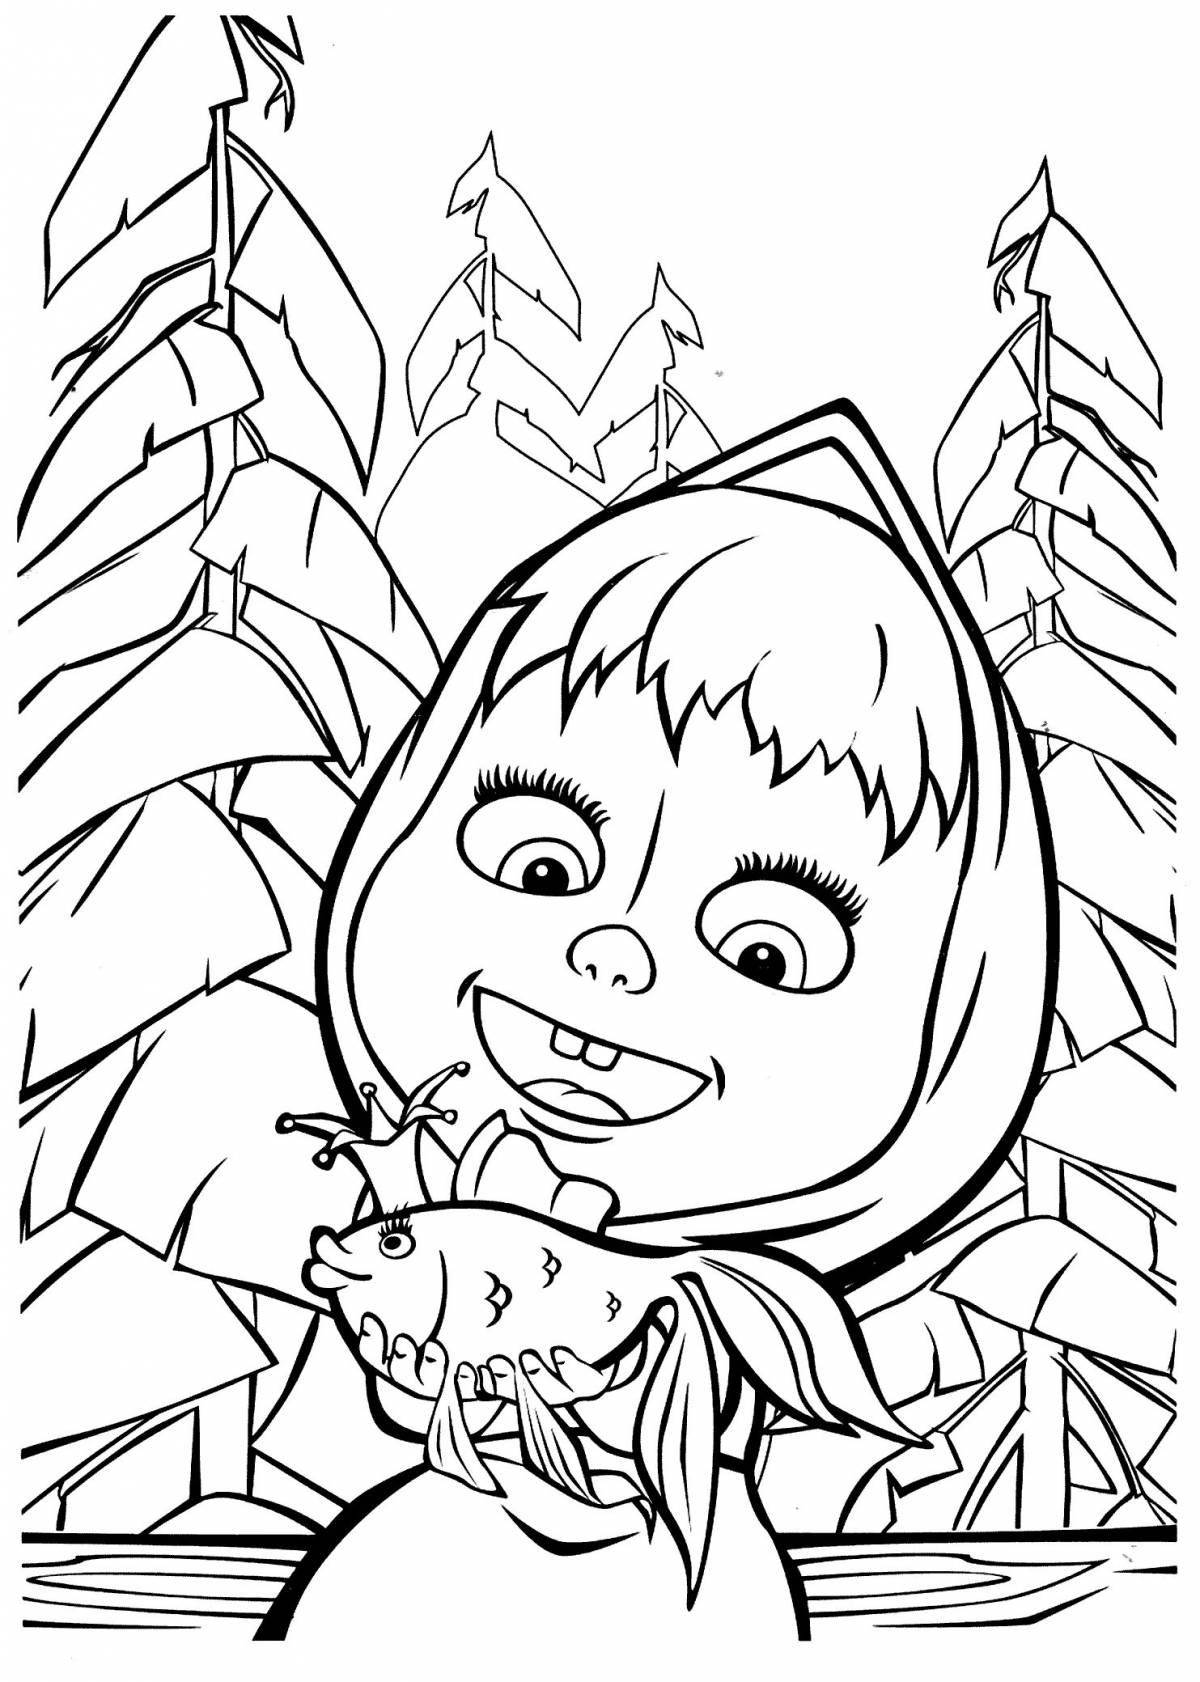 Playful masha and the bear deluxe coloring book